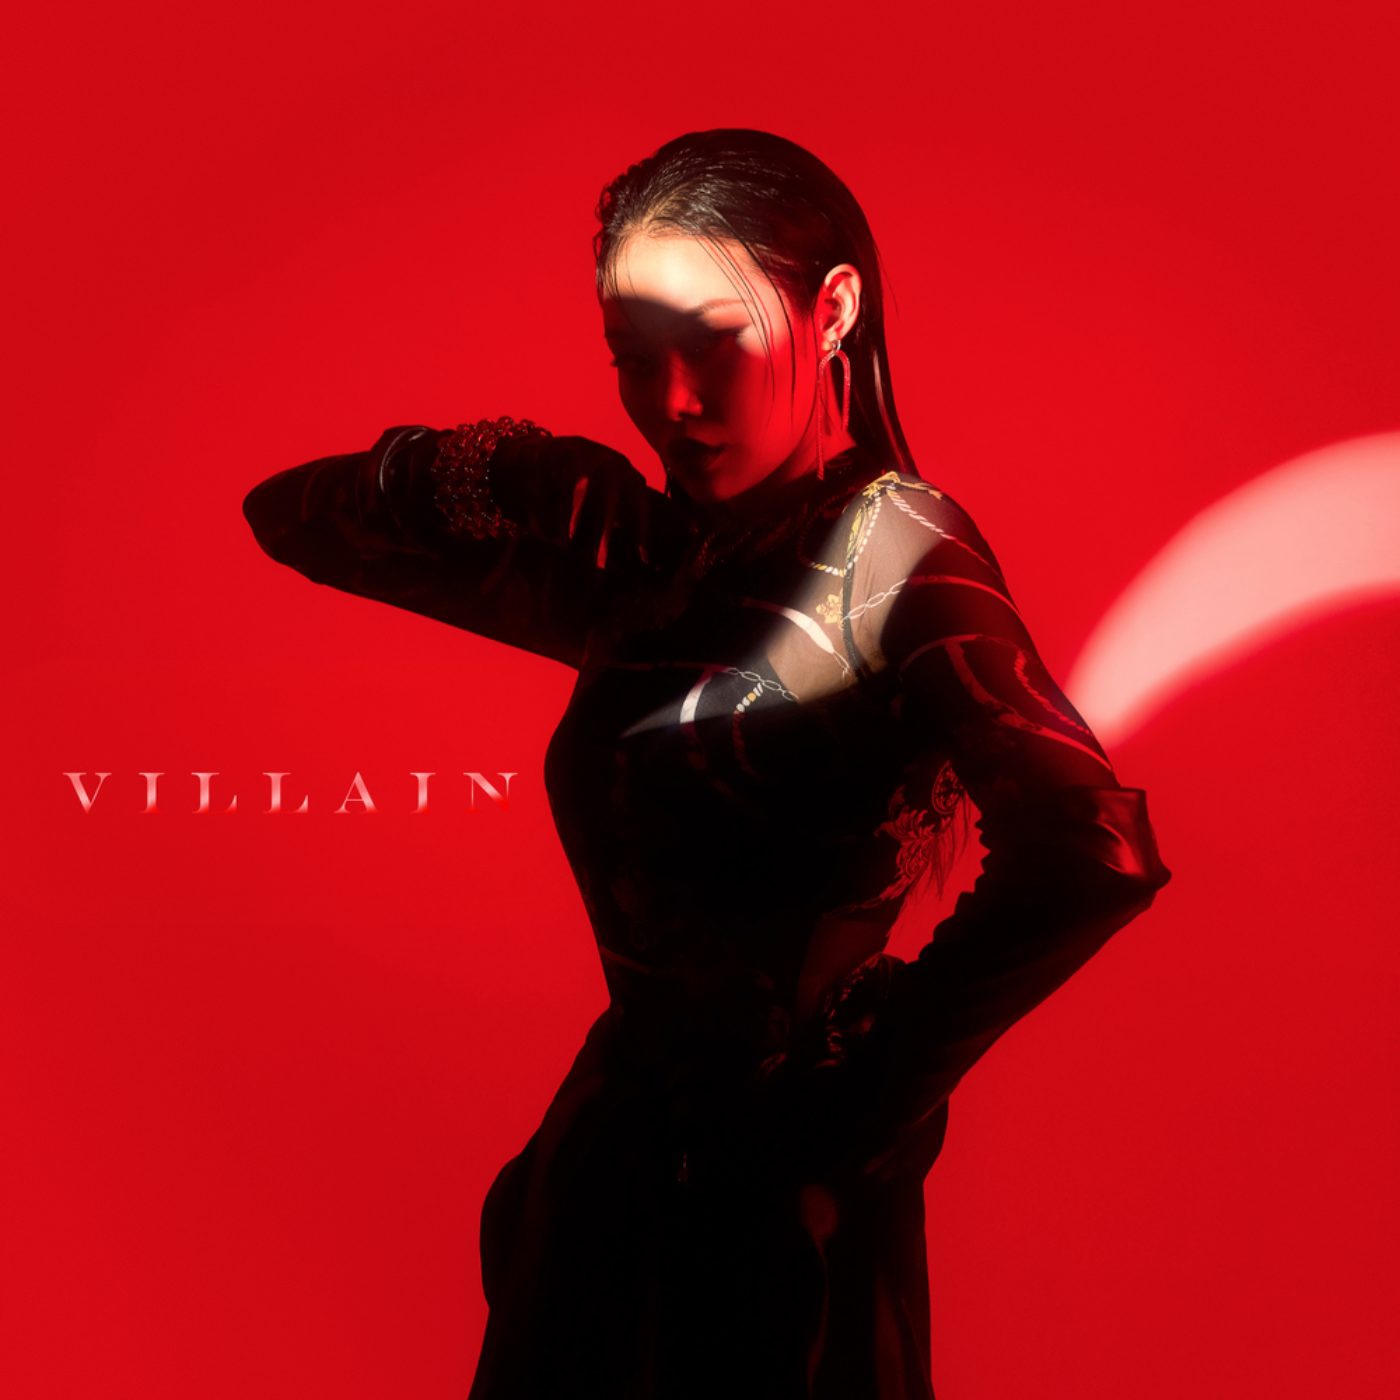 https://static.wikia.nocookie.net/kpop/images/2/2a/Cheetah_Villain_album_cover.png/revision/latest?cb=20210226175503